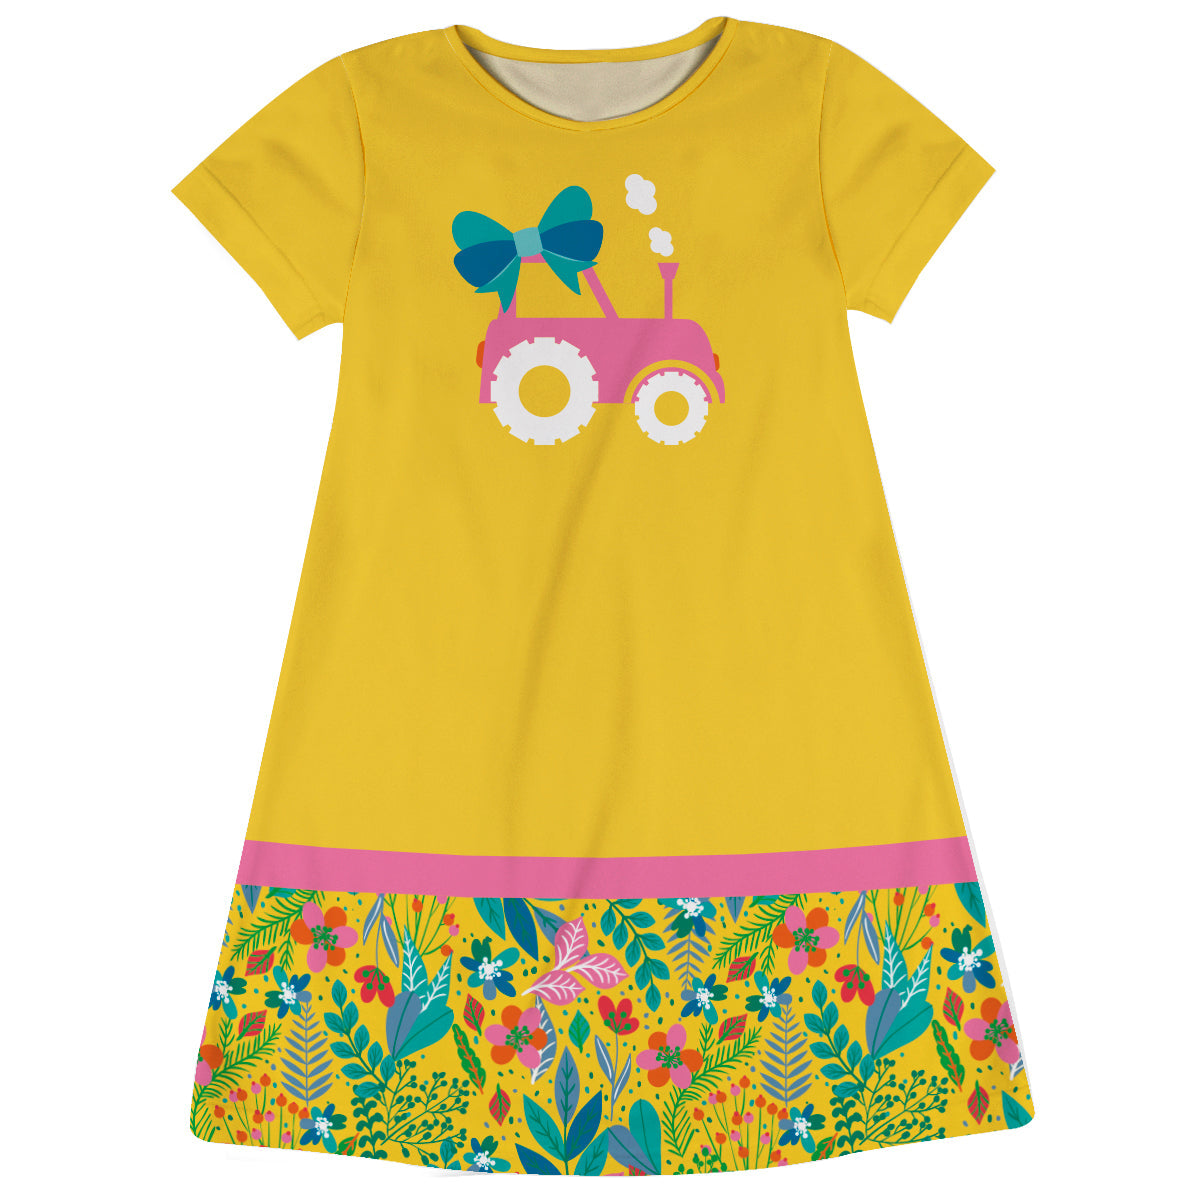 Yellow and floral tractor short sleve a line dress - Wimziy&Co.